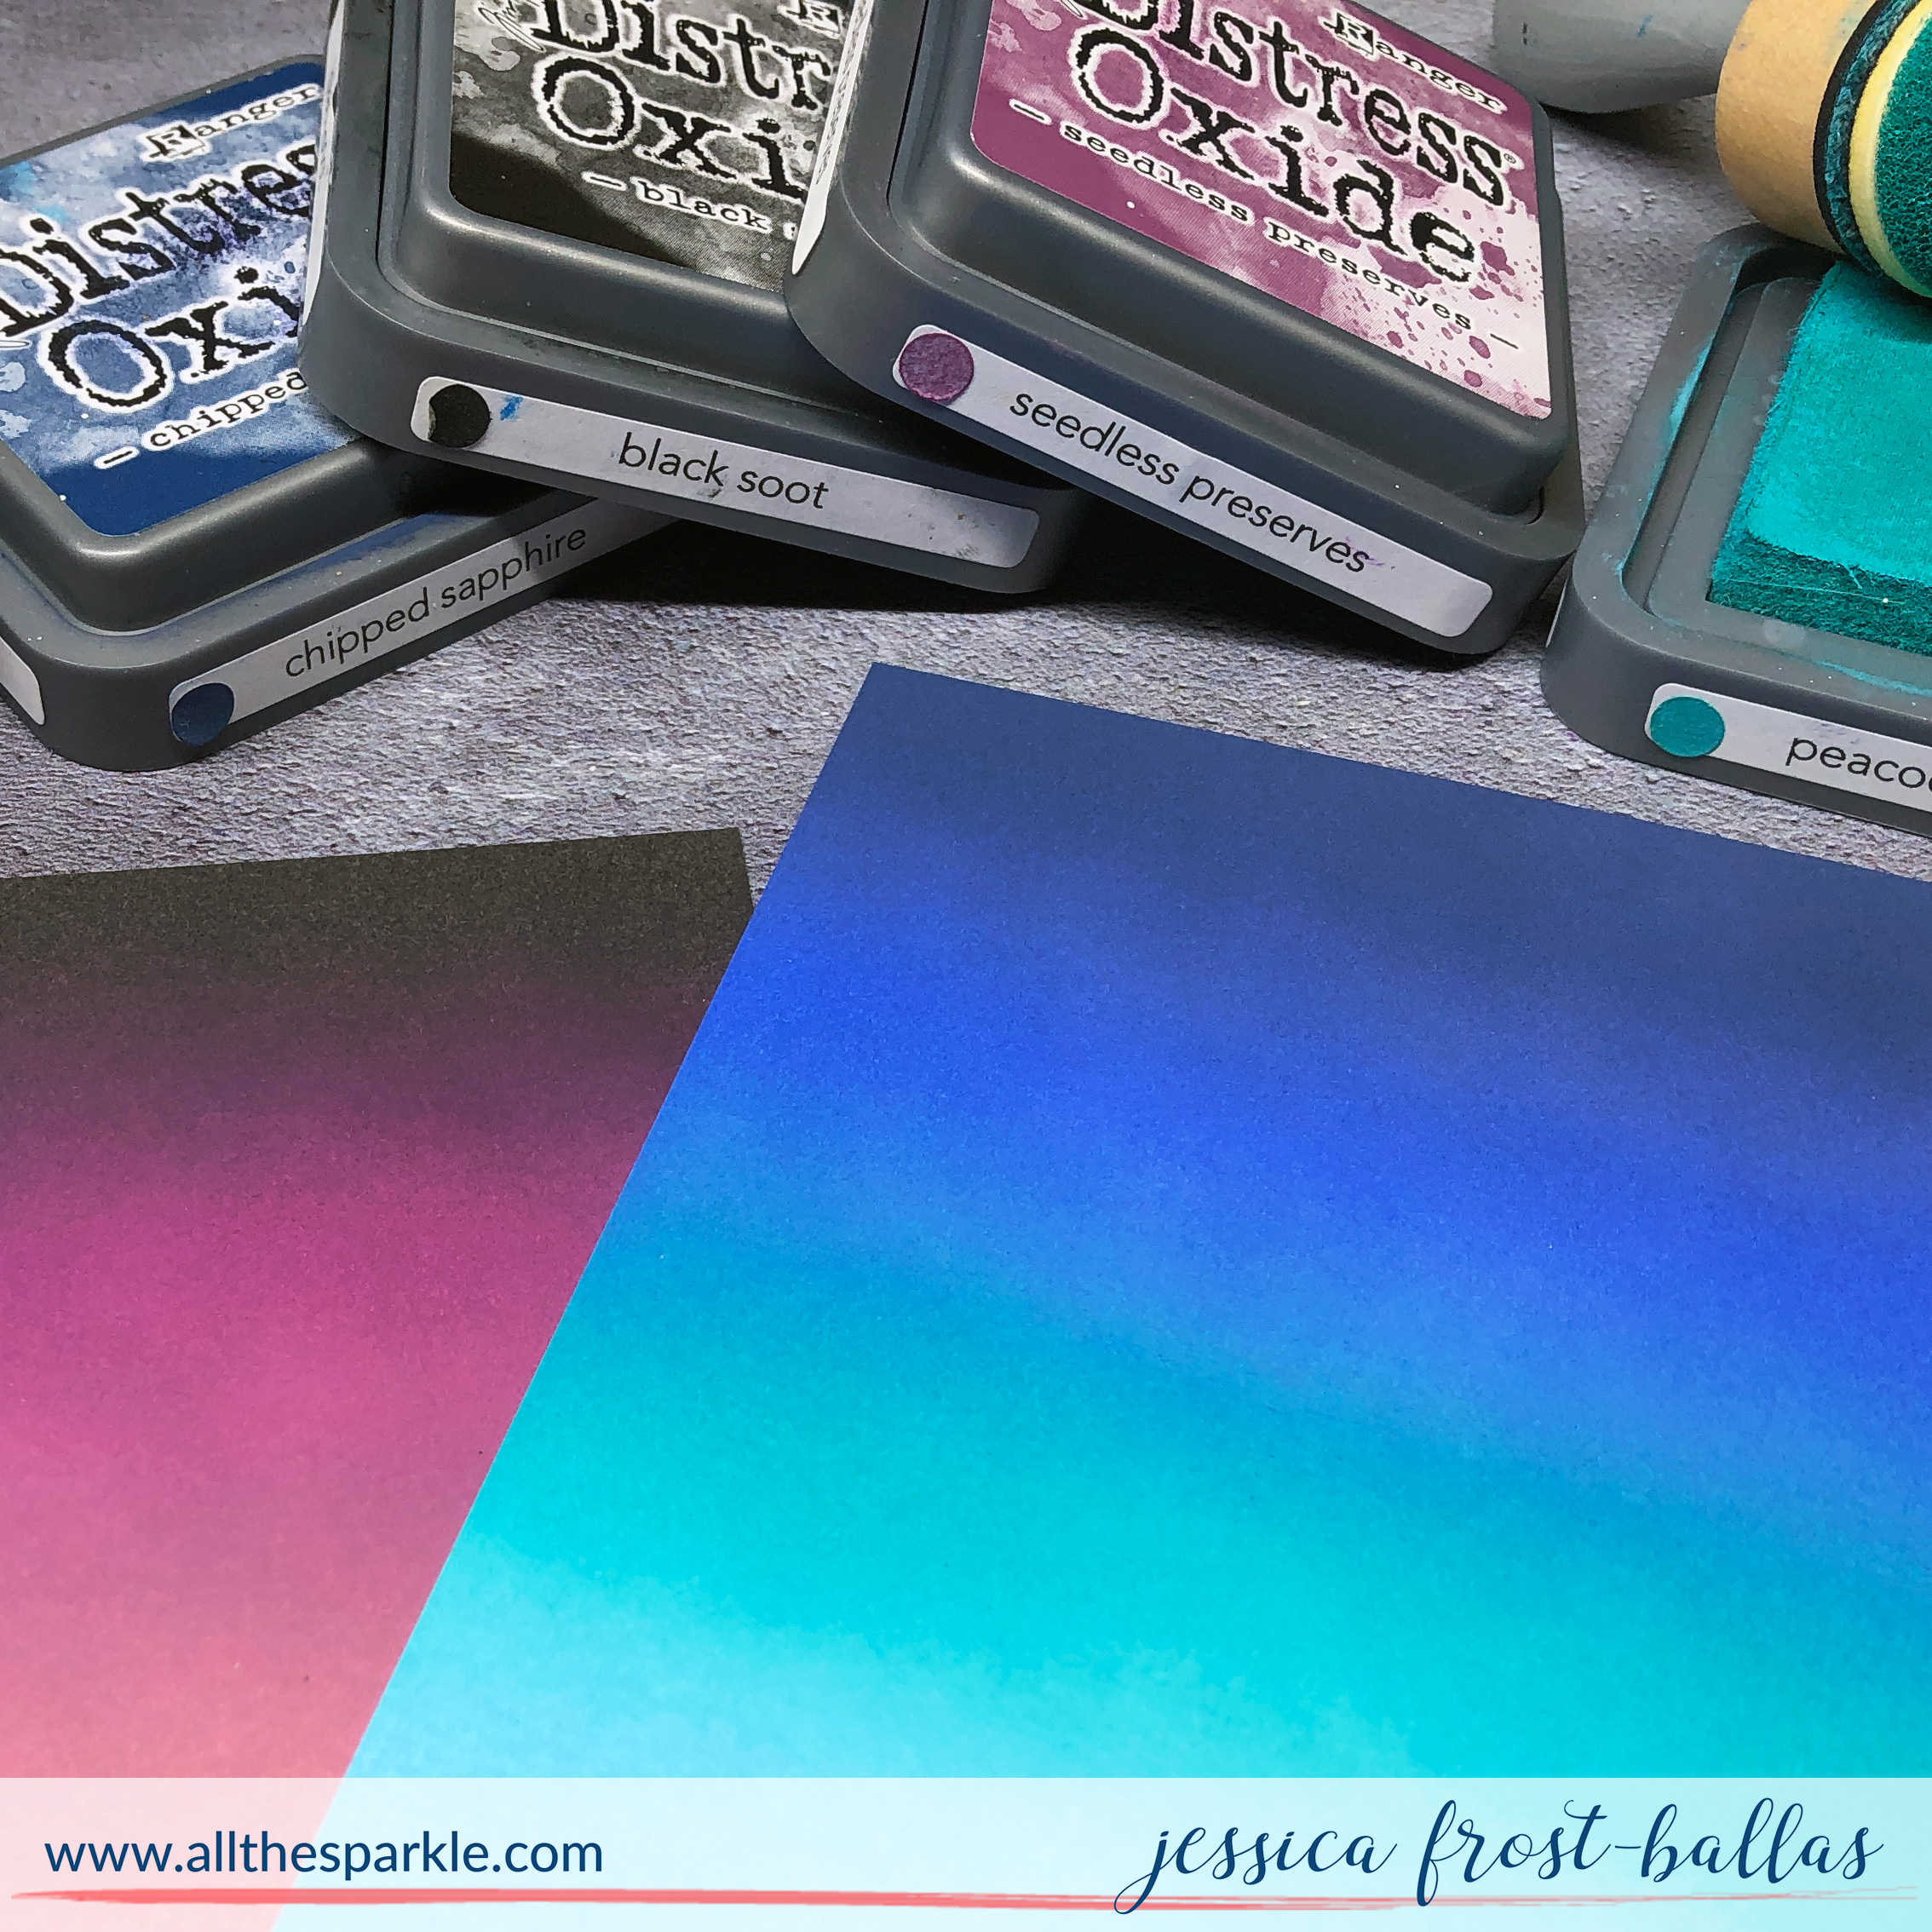 20 Ink Blending Tips and Tricks for Beginners by Jessica Frost-Ballas